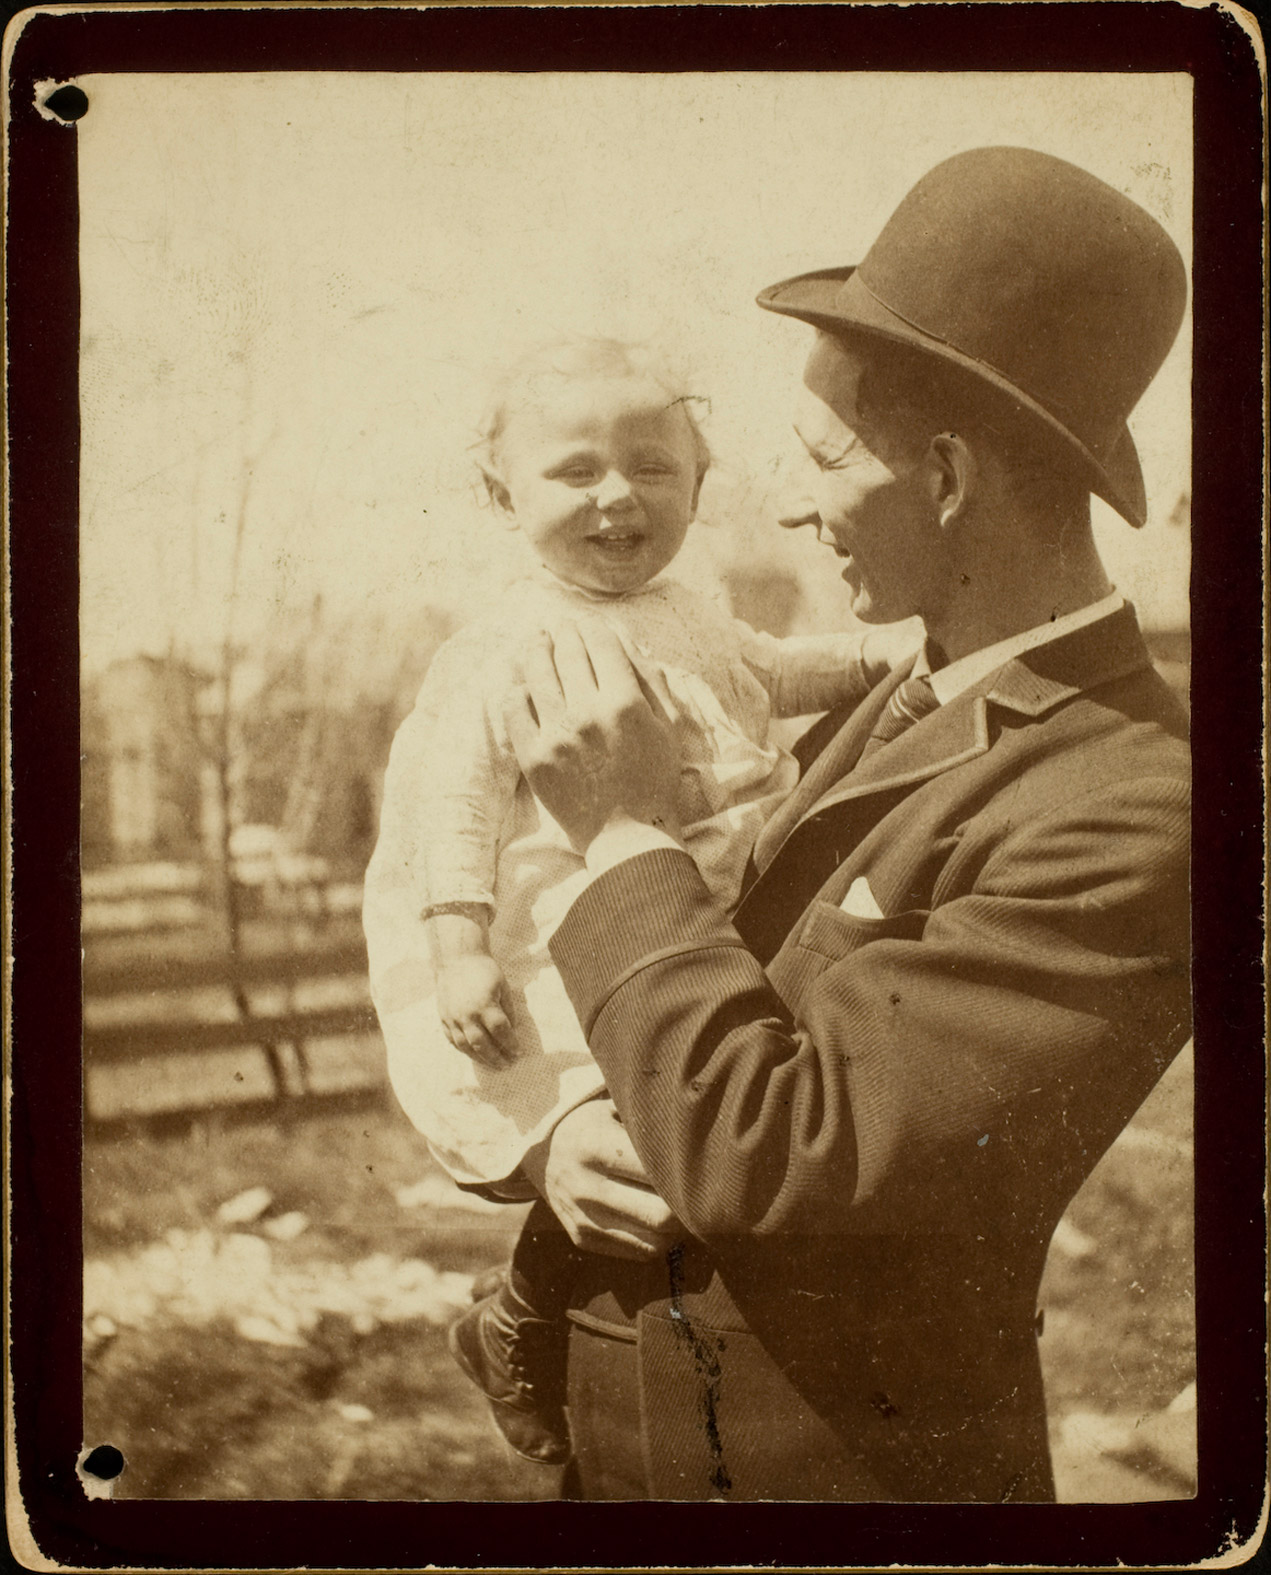 Unidentified photographer. No. 4 Kodak snapshot of Henry Meyering holding Hortense Glaser, ca. 1890. Collodion or gelatin printing out paper (POP) print. Museum Collection.